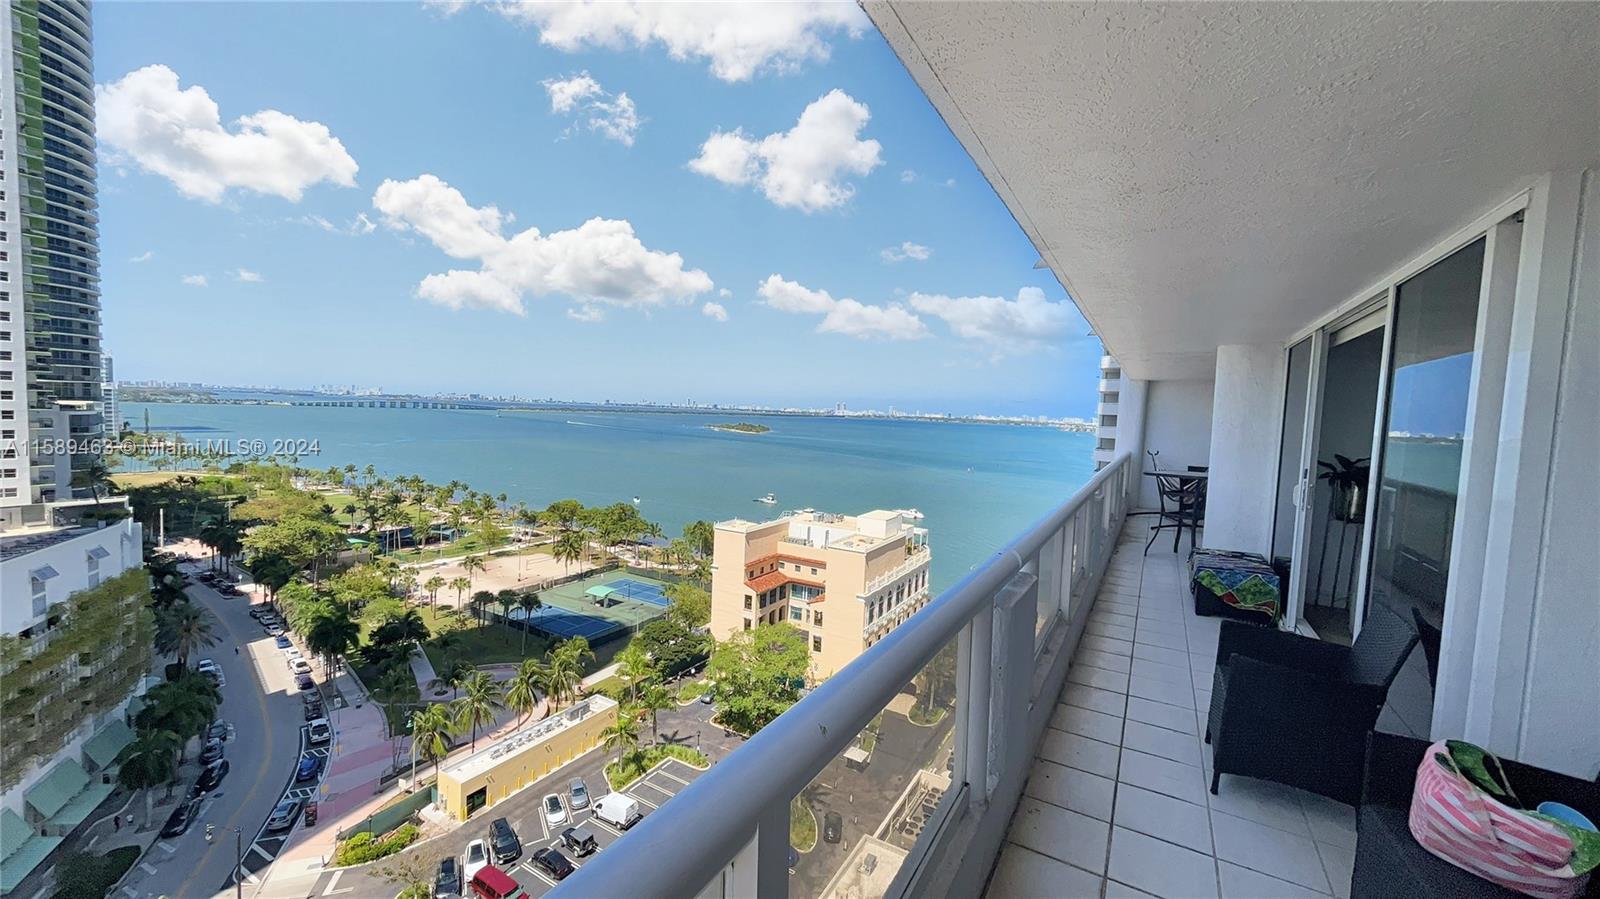 **Available August 1st**
3 Bed / 3 Bath + Den converted to a 4th room. 1,840 Sq Ft of interior, this unit offers breathtaking views of Biscayne Bay, the Ocean and Margaret Pace Park. Located at The Grand, the building is in a prime location, only minutes away from Brickell, Miami Beach, Design District, and Miami International Airport, making it an ideal spot for both leisure and travel. The building amenities include pool, jacuzzi, fitness center, and access to the Retail Shops located at the lobby level featuring over 5 restaurants, a beauty salon, pharmacy, mini-market and more.